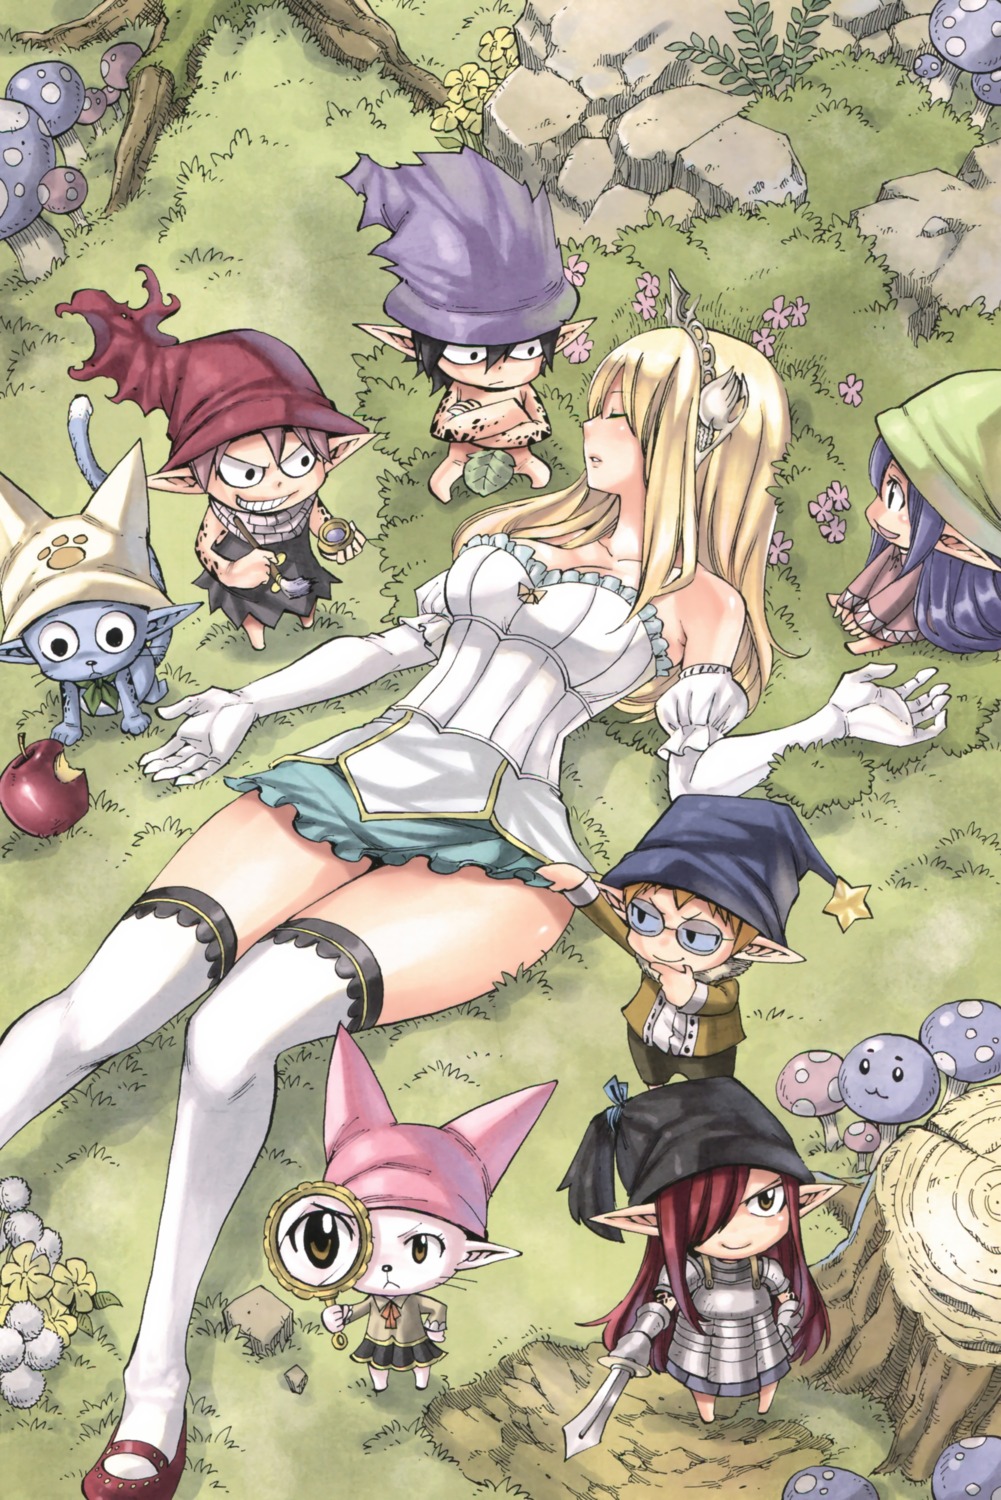 armor charle chibi cleavage dress erza_scarlet fairy_tail gray_fullbuster happy_(fairy_tail) loke lucy_heartfilia mashima_hiro megane naked natsu_dragneel neko pointy_ears skirt_lift sword thighhighs torn_clothes wendy_marvell